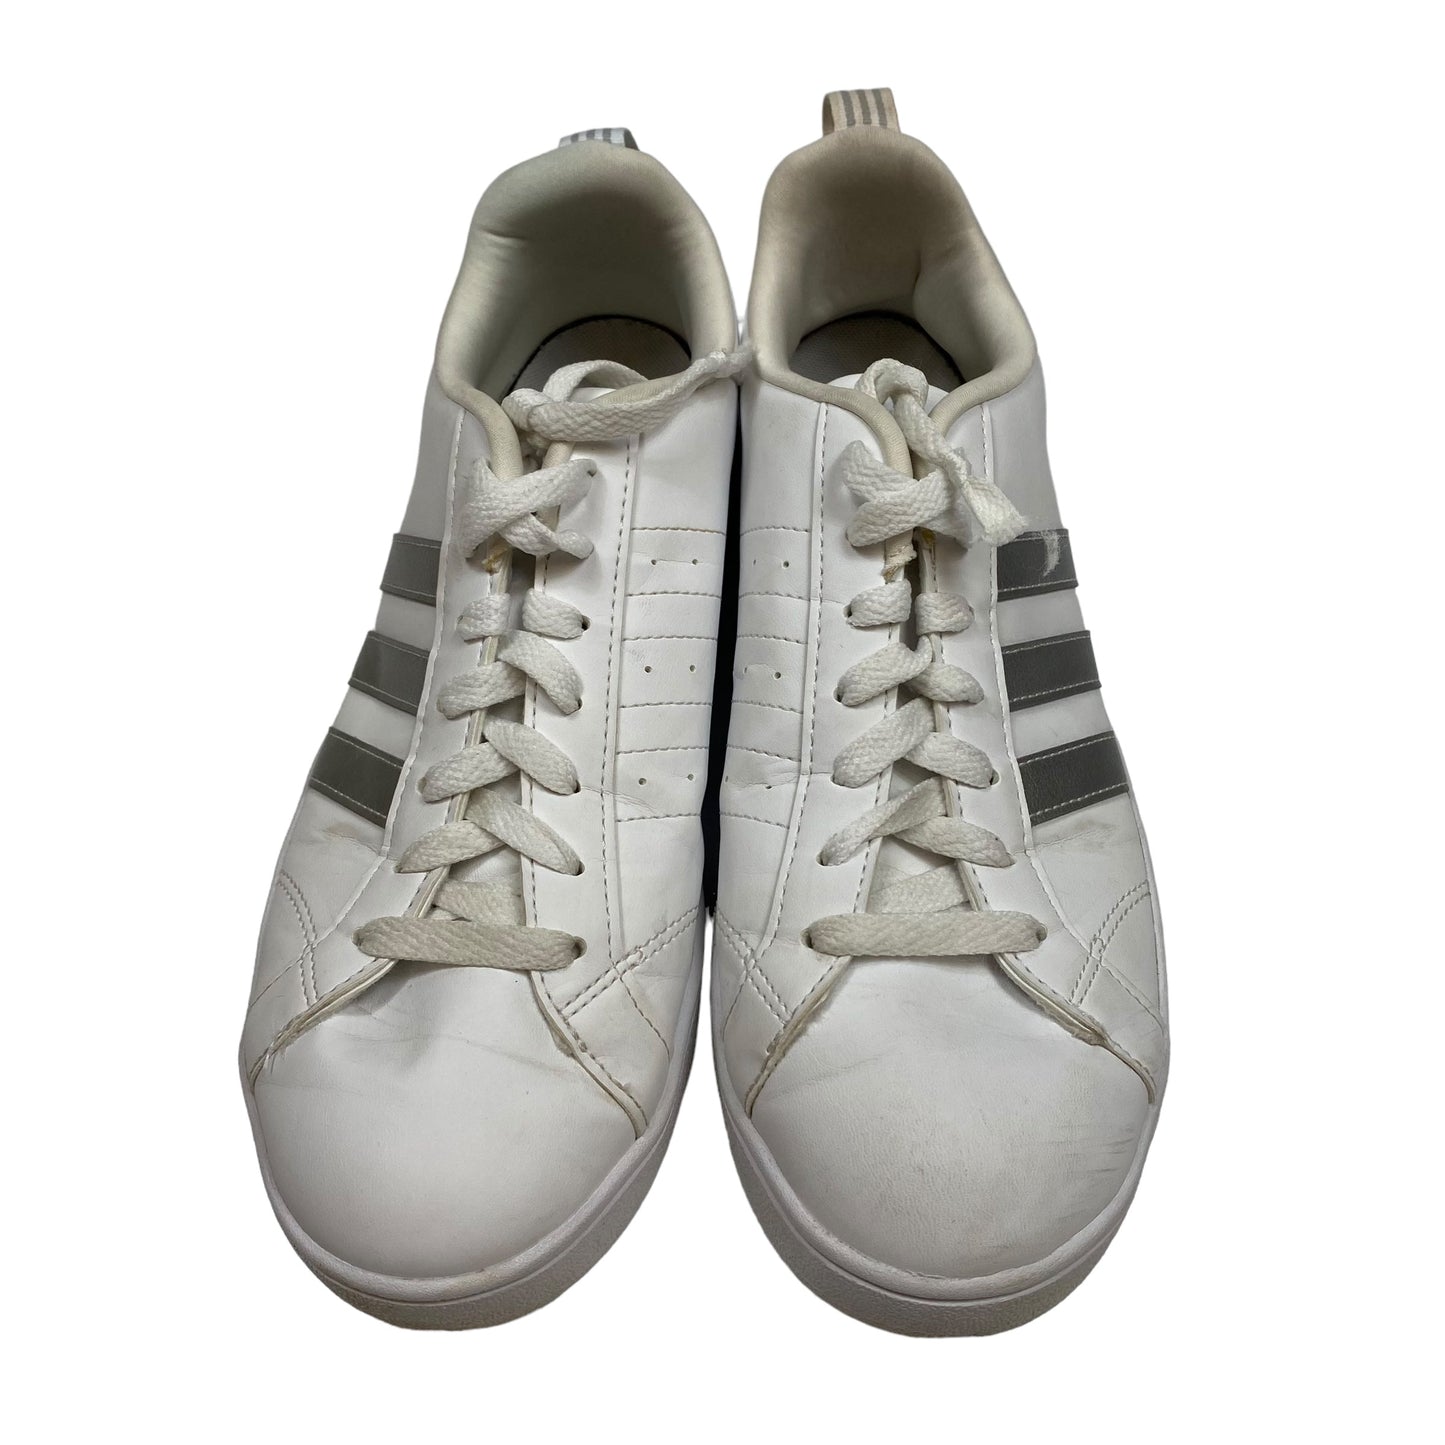 White Shoes Sneakers Adidas, Size 8.5